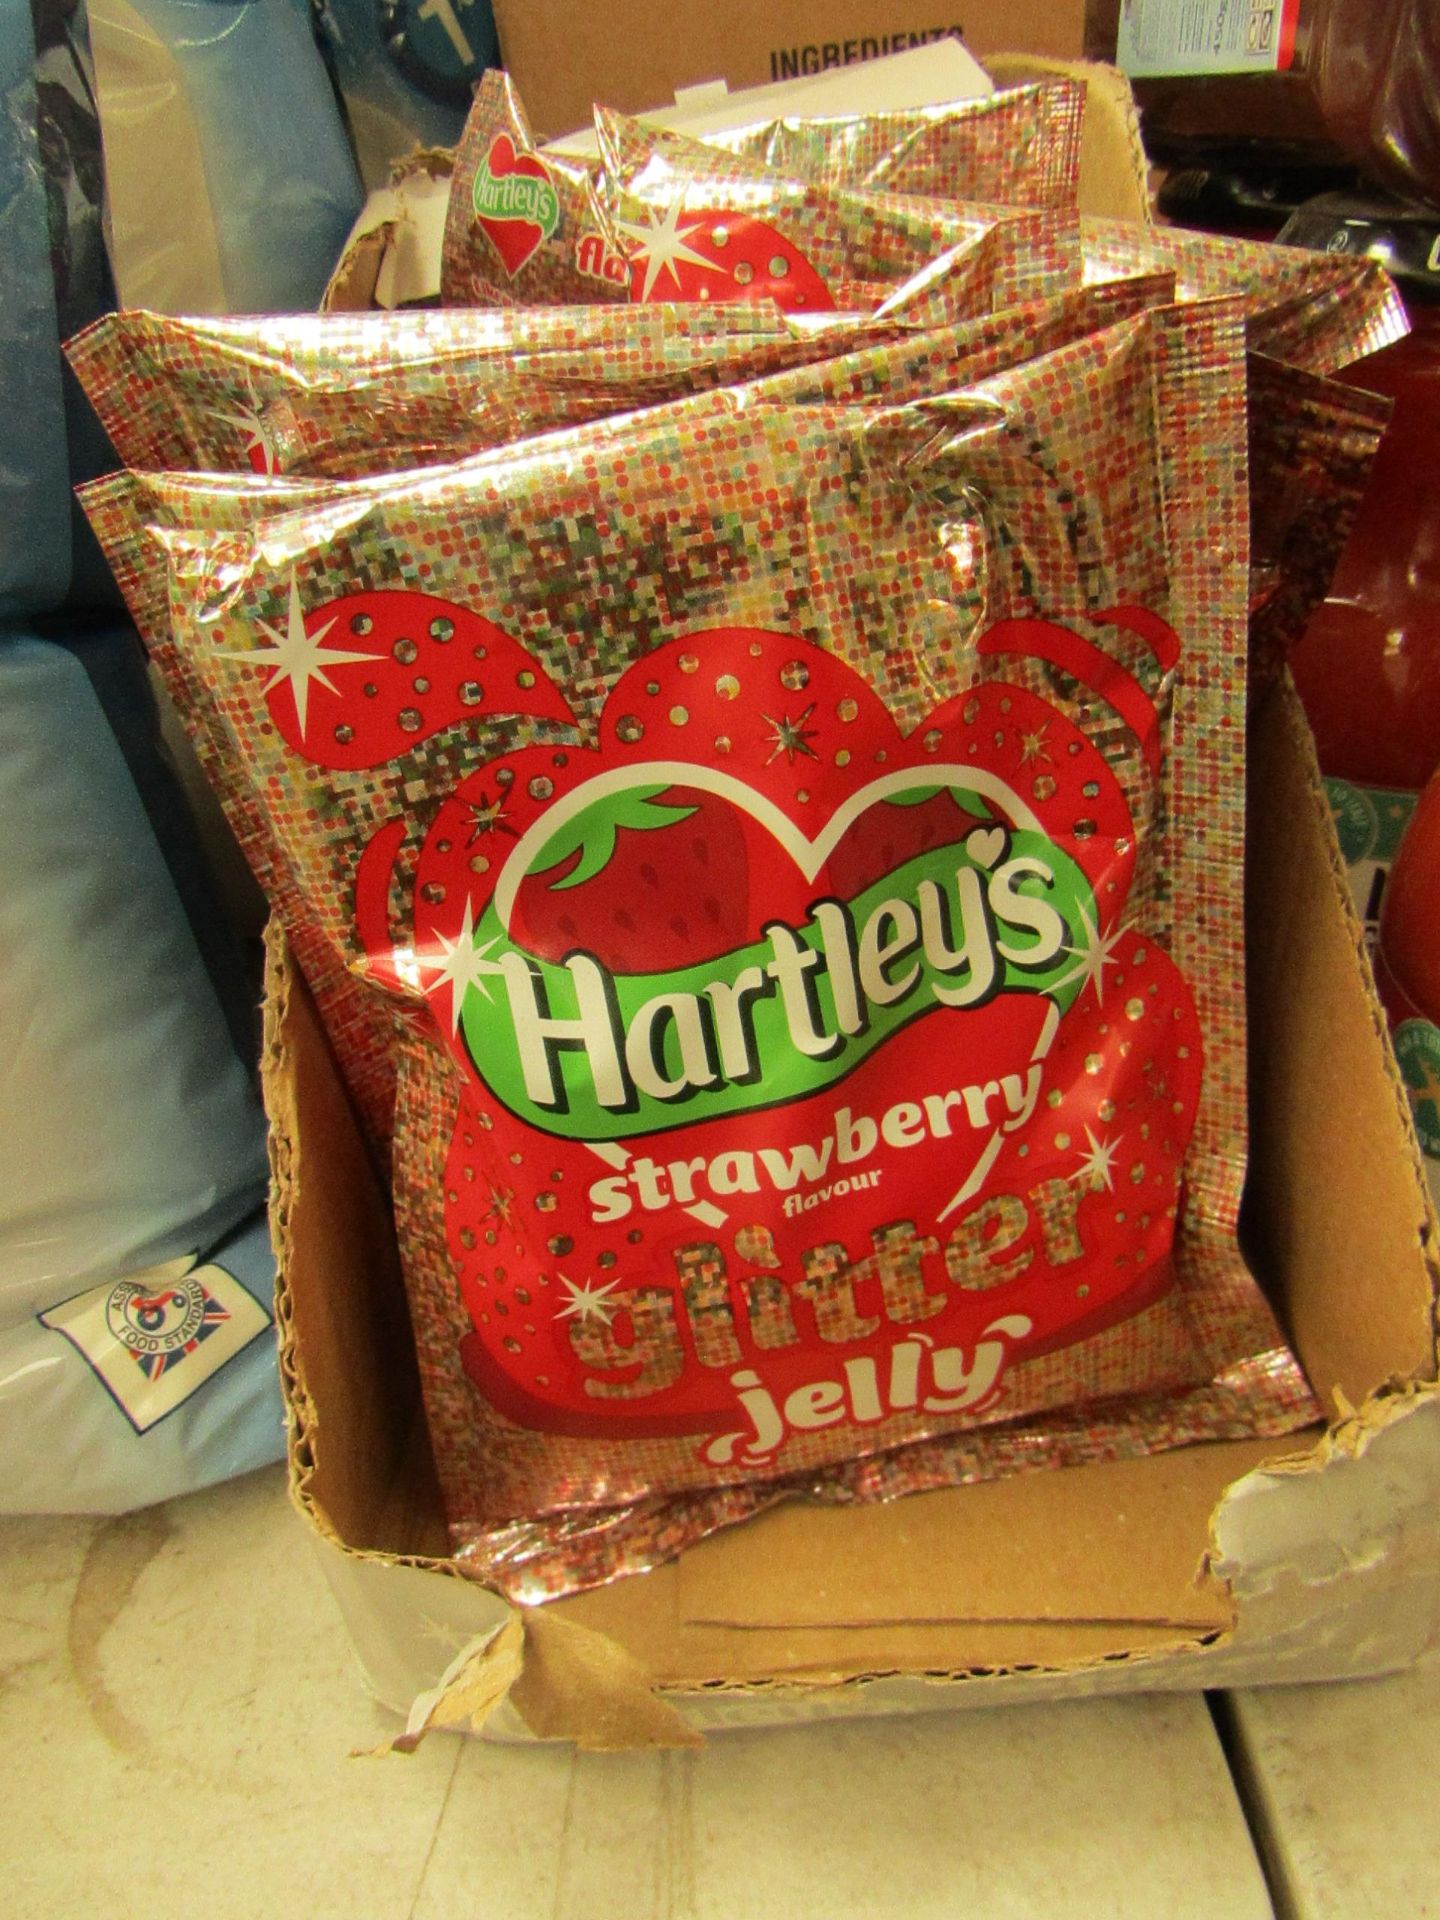 15x Hartleys - Strawberry Glitter Jelly (100g Pouches) - BBD July 2021. - Unused & Packaged.